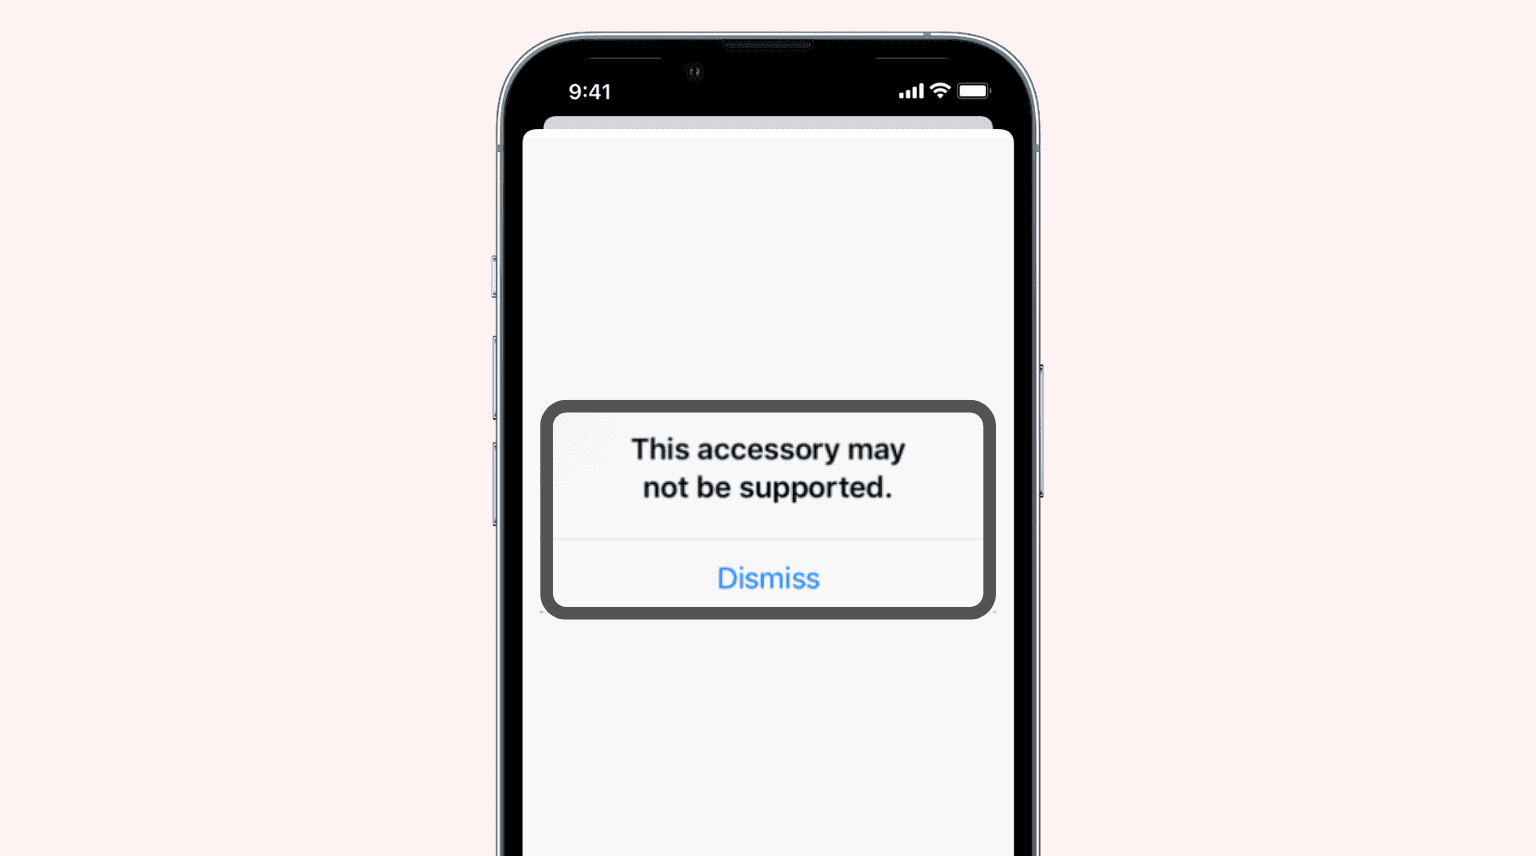 If your phone is connected to any external accessories, such as cases, remove them.
Disconnect any cables or devices connected to the phone.